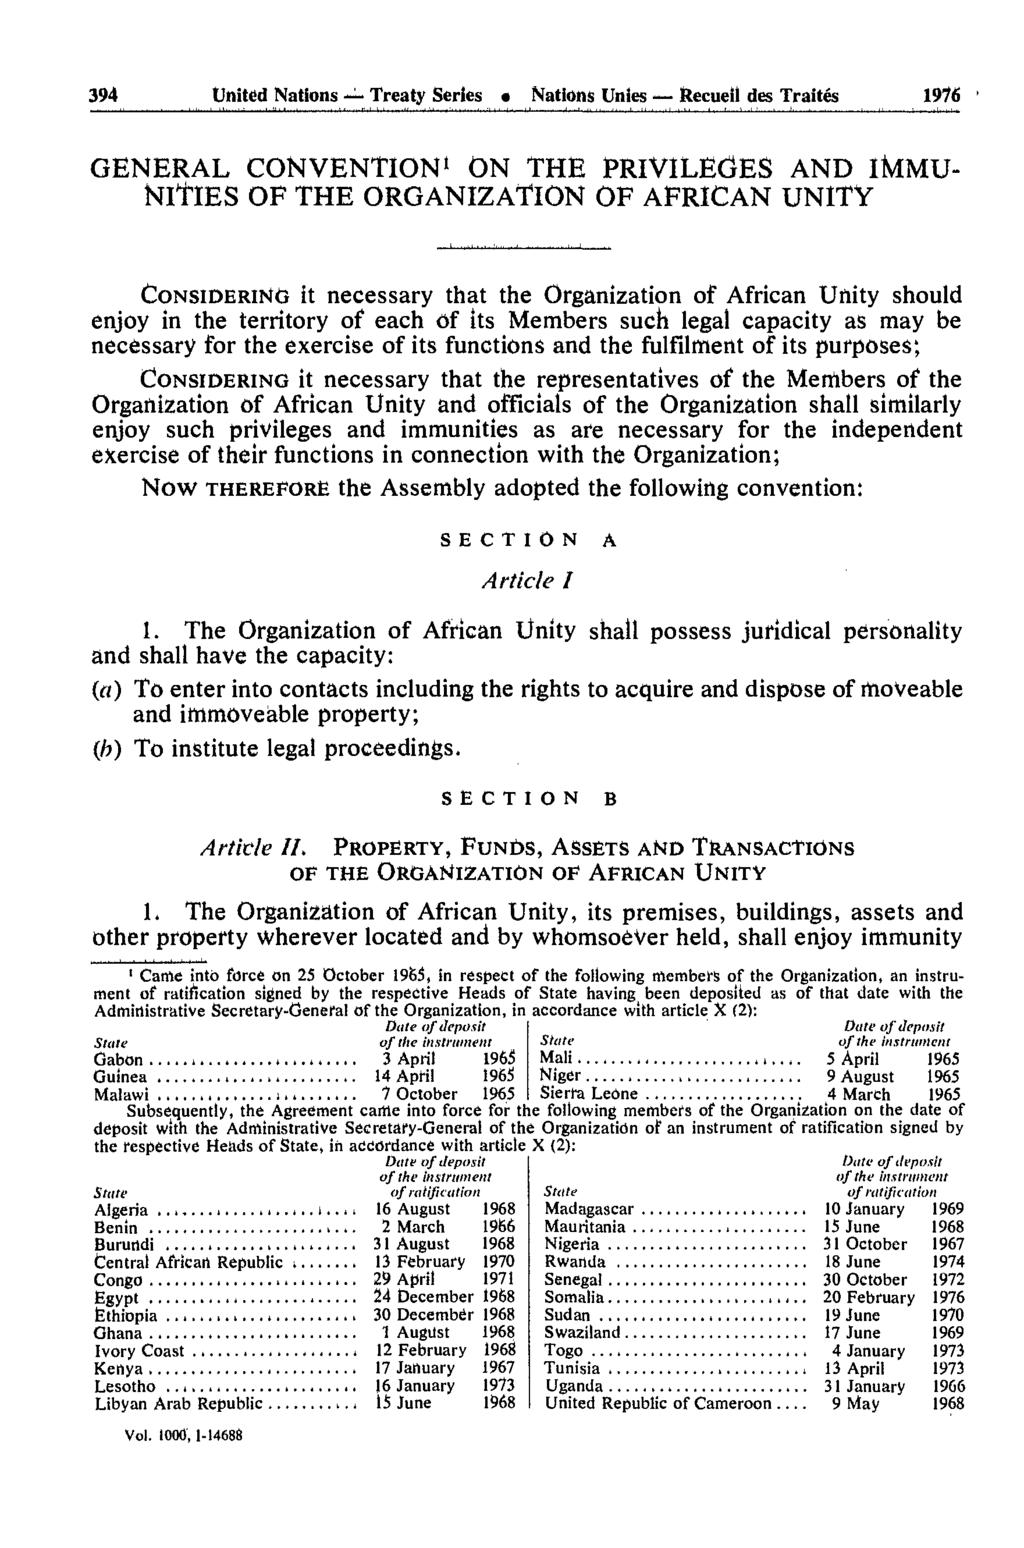 394 United Nations Treaty Series Nations Unies Recueil des Traités 1976 GENERAL CONVENTION 1 ON THE PRIVILEGES AND ikmu- NITIES OF THE ORGANIZATION OF AFRICAN UNITY CONSIDERING it necessary that the